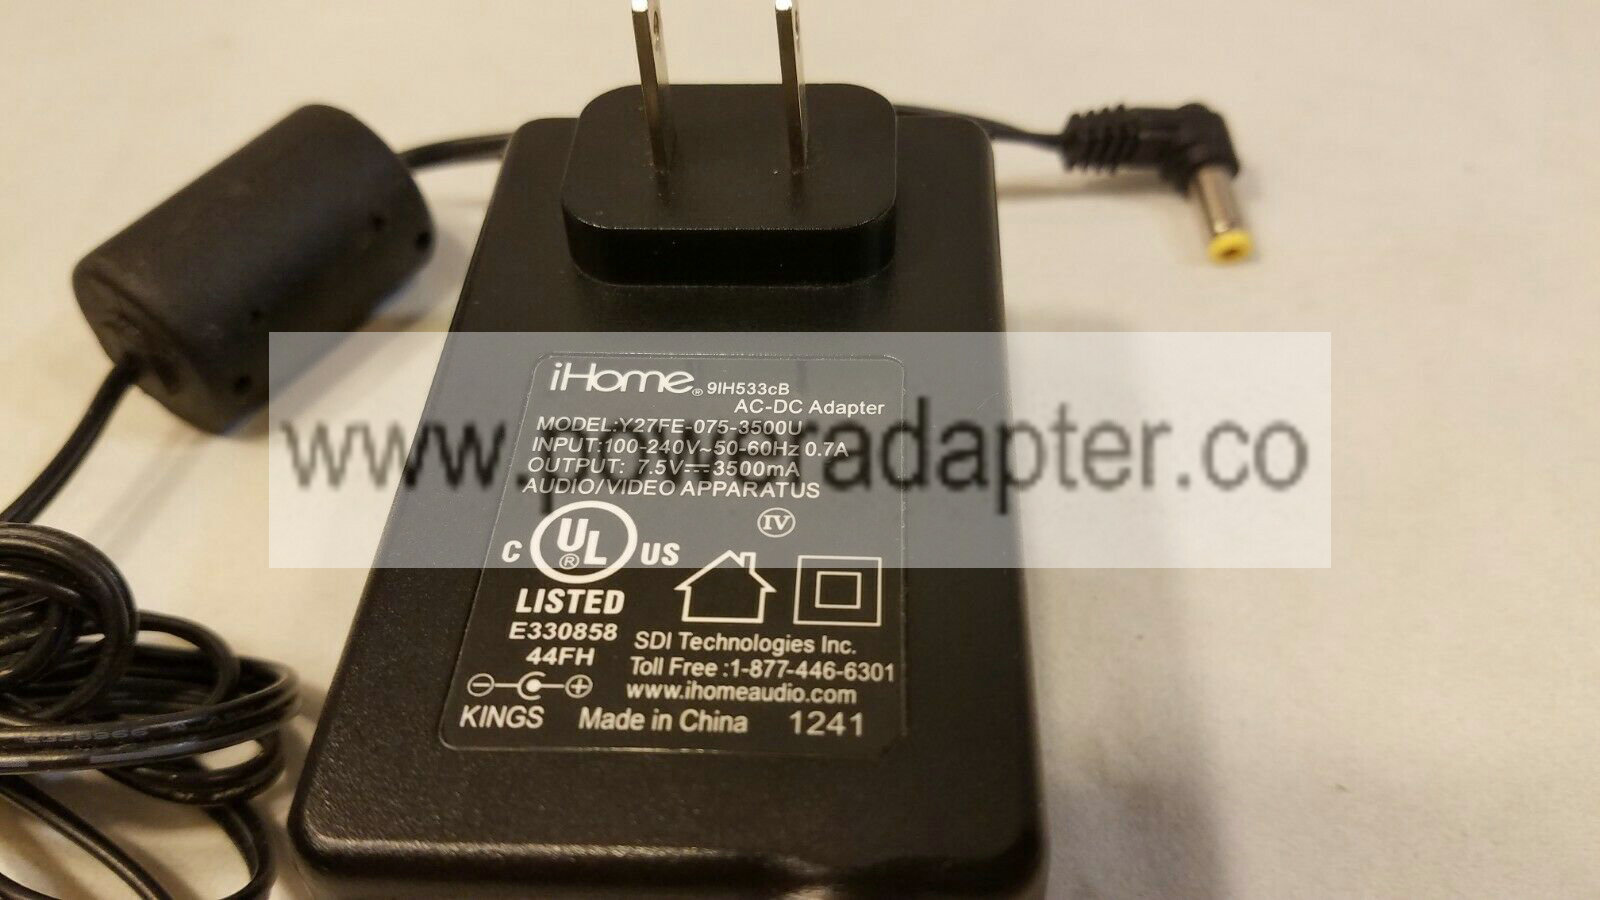 iHome Y27FE-075-3500U AC Power Supply Adapter Charger 7.5V 3500mA TESTED WORKING Bundle Listing: No MPN: 9IH508cB Mod - Click Image to Close